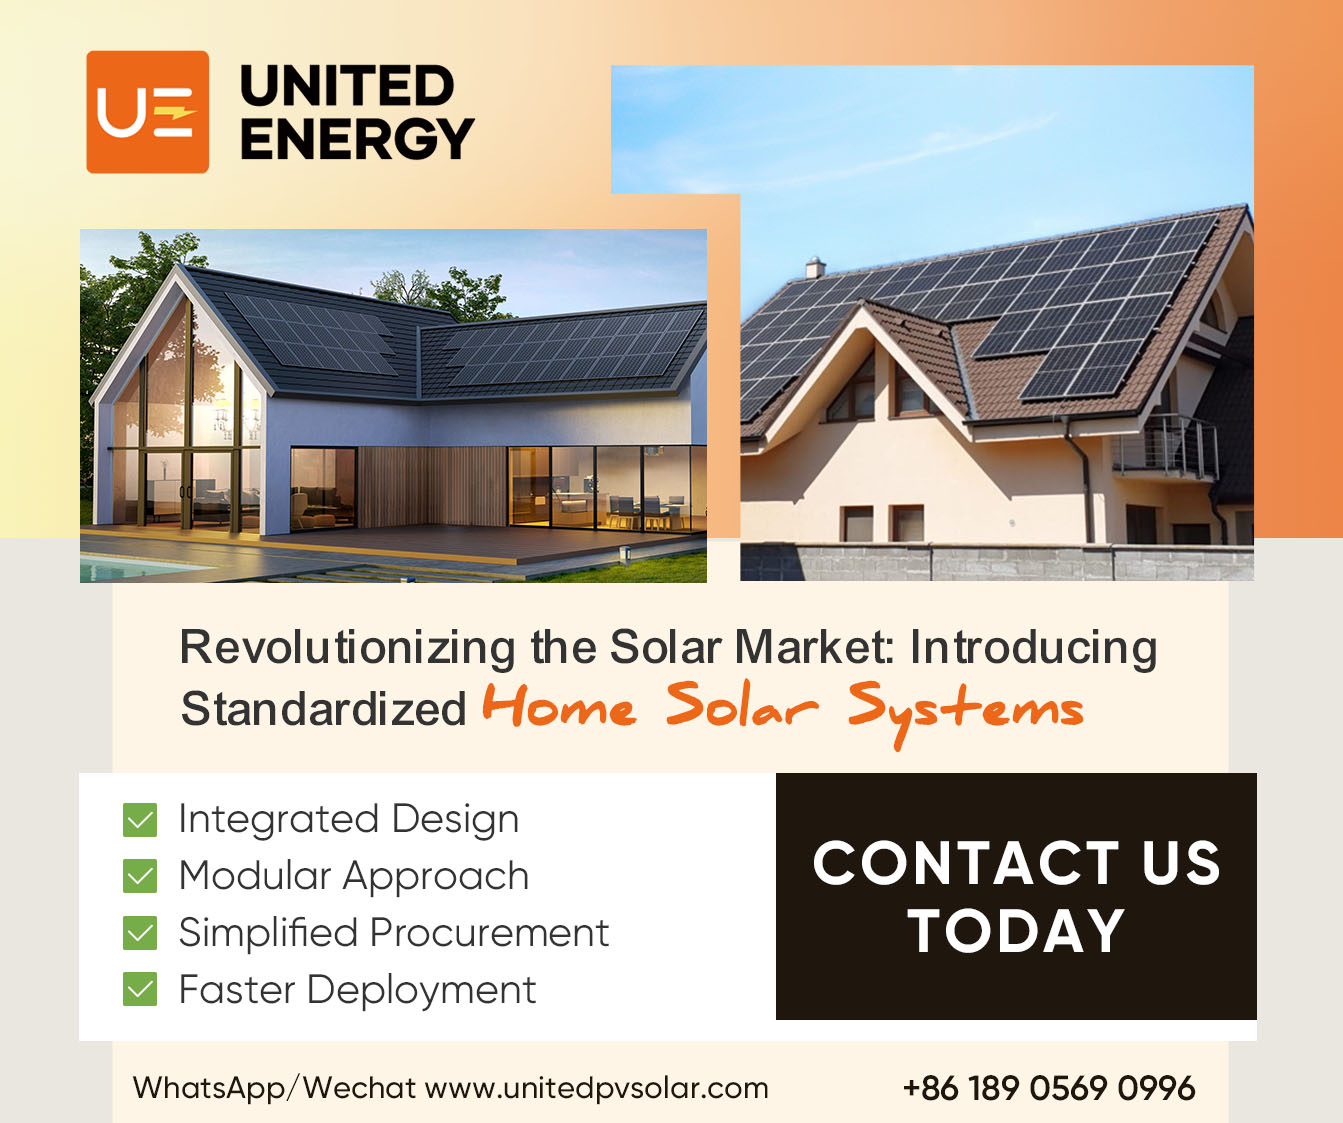 Introducing Standardized Home Solar Systems